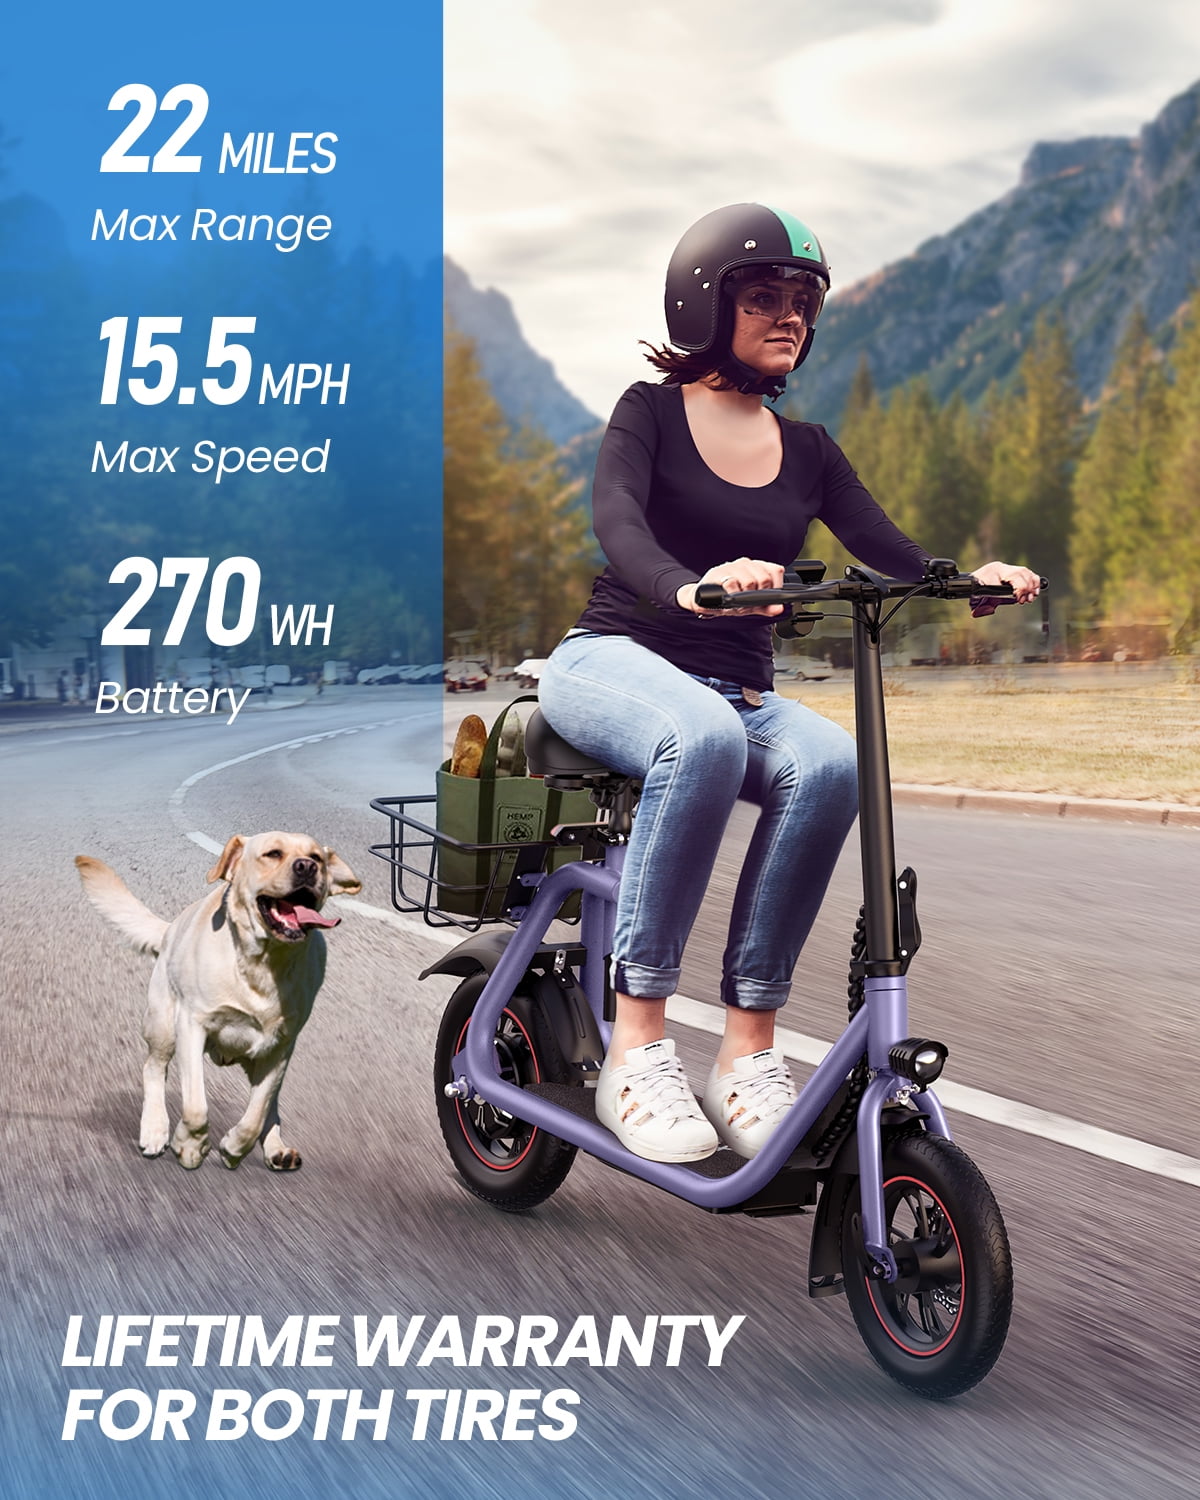 URBANMAX C1 Folding 15.5Mph, Adult Range, Speed Commuting Basket-Purple Seat, Scooter Scooter Electric for Motor for with with Miles Electric Powerful Max Electric to Scooter up 450W 22